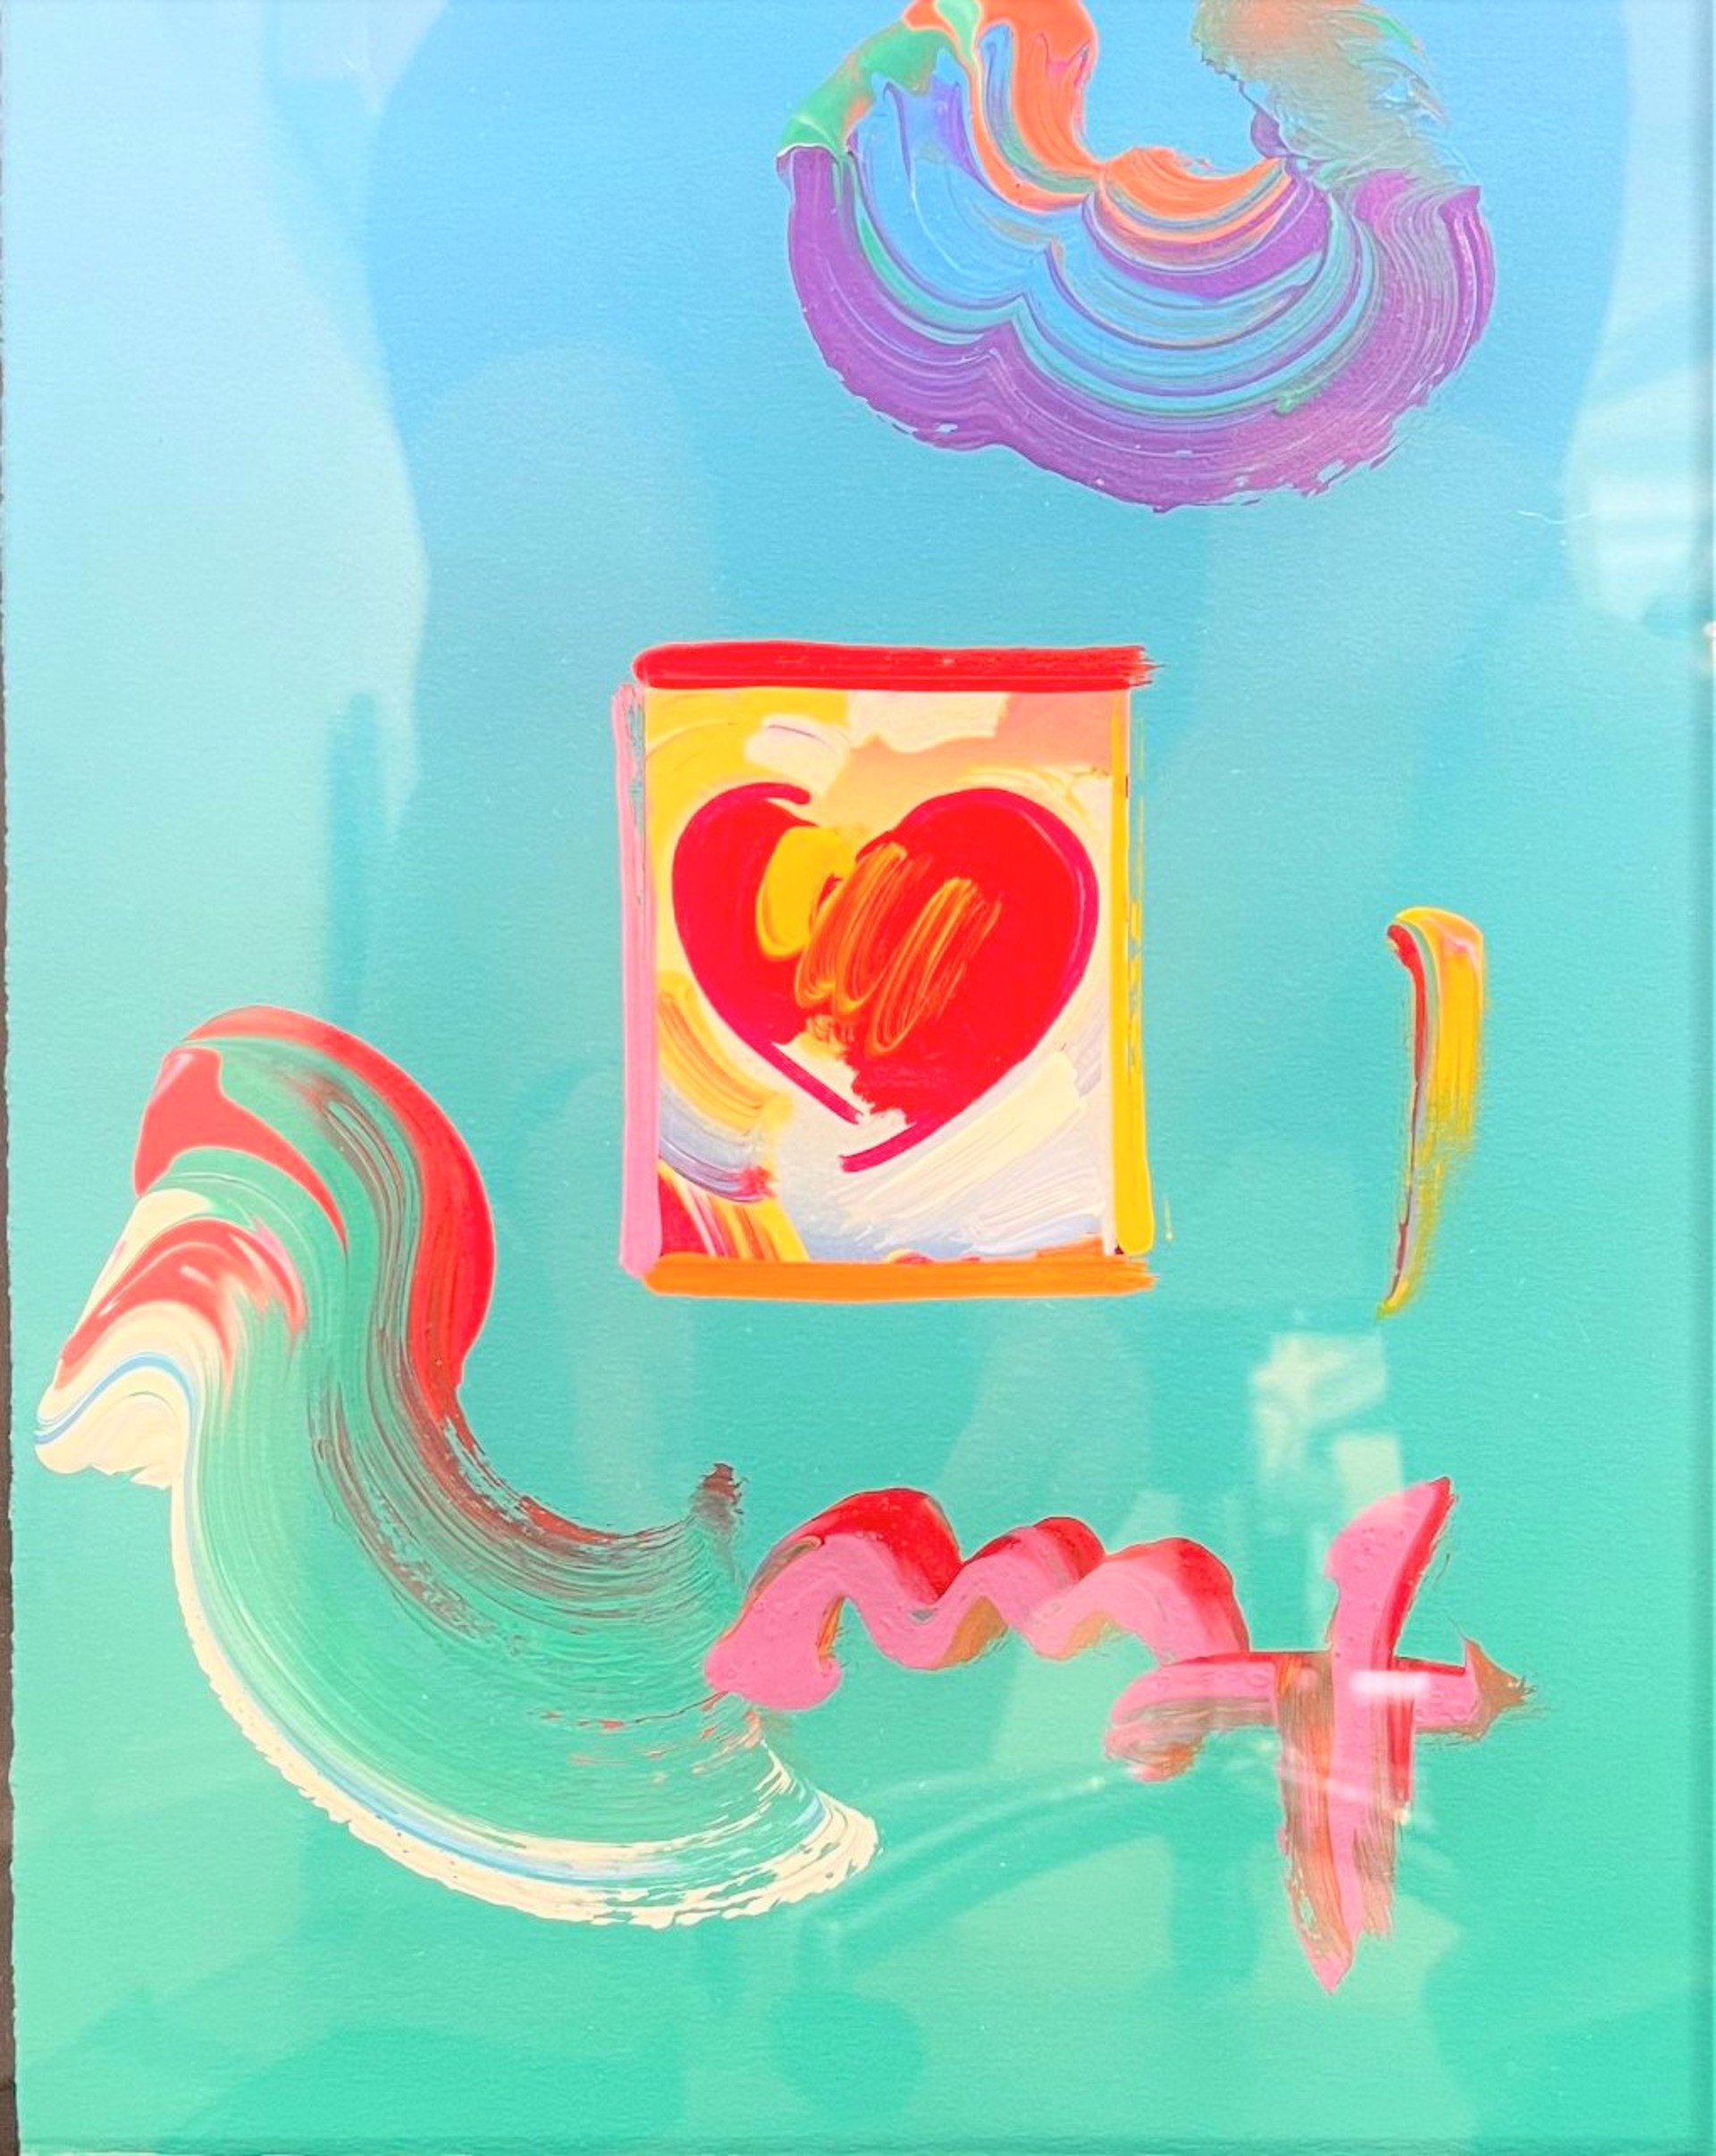 Heart Serles by Peter Max